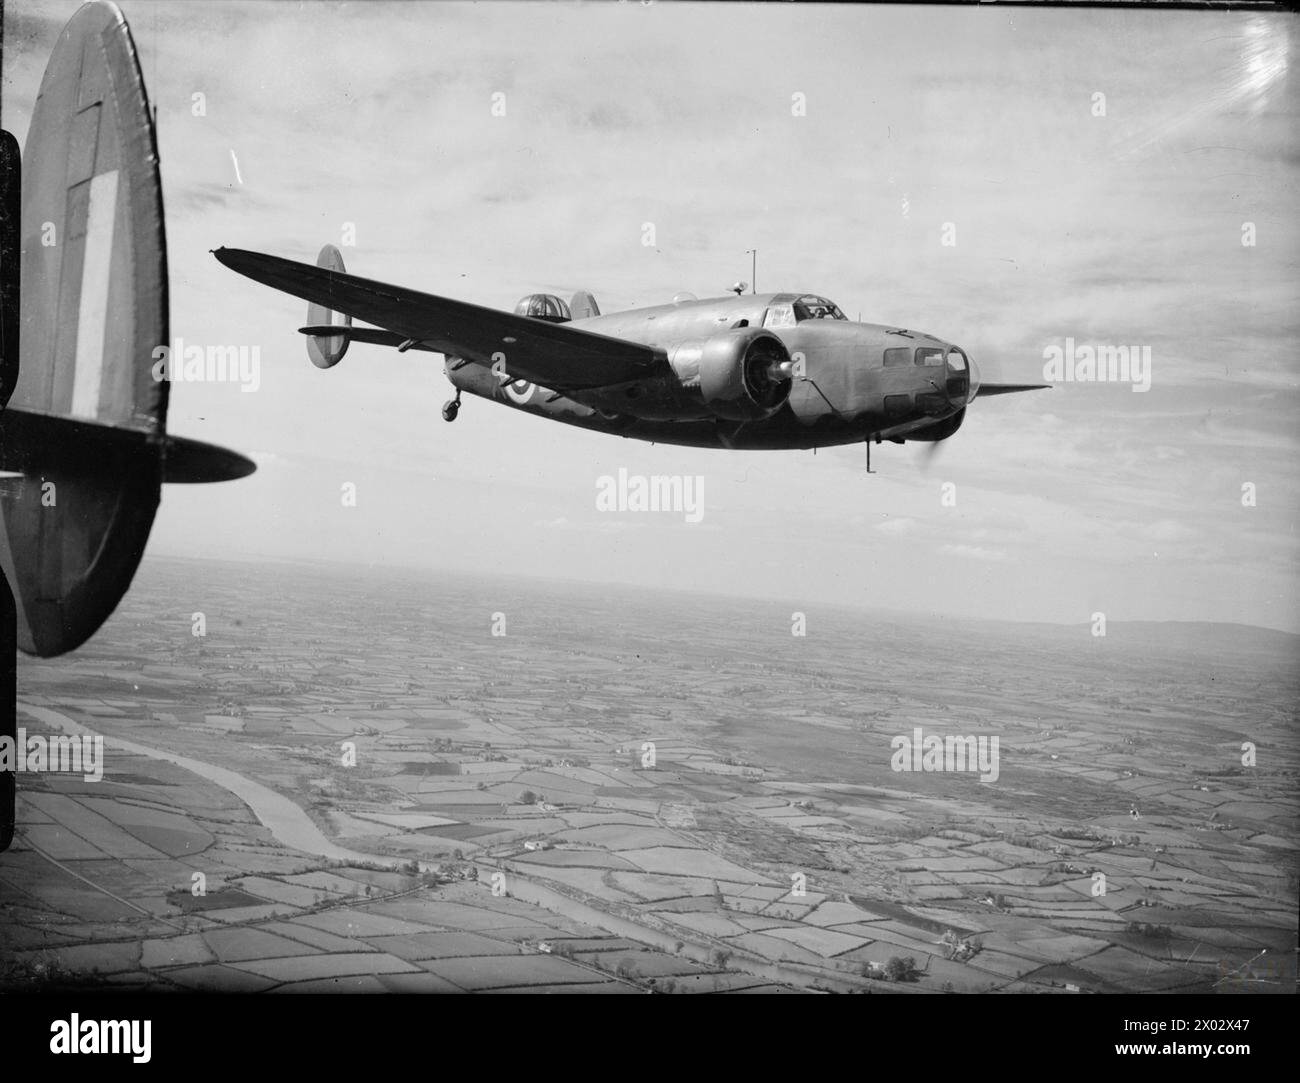 AMERICAN AIRCRAFT IN RAF SERVICE 1939-1945: LOCKHEED L-214 & L-414 HUDSON. - Hudson Mark II, T9376 ZS-X, of No. 233 Squadron RAF, returning to its base at Aldergrove, County Antrim, from a convoy patrol. The aircraft is equipped with ASV Mark 1 radar , Royal Air Force, Maintenance Unit, 235 Stock Photo